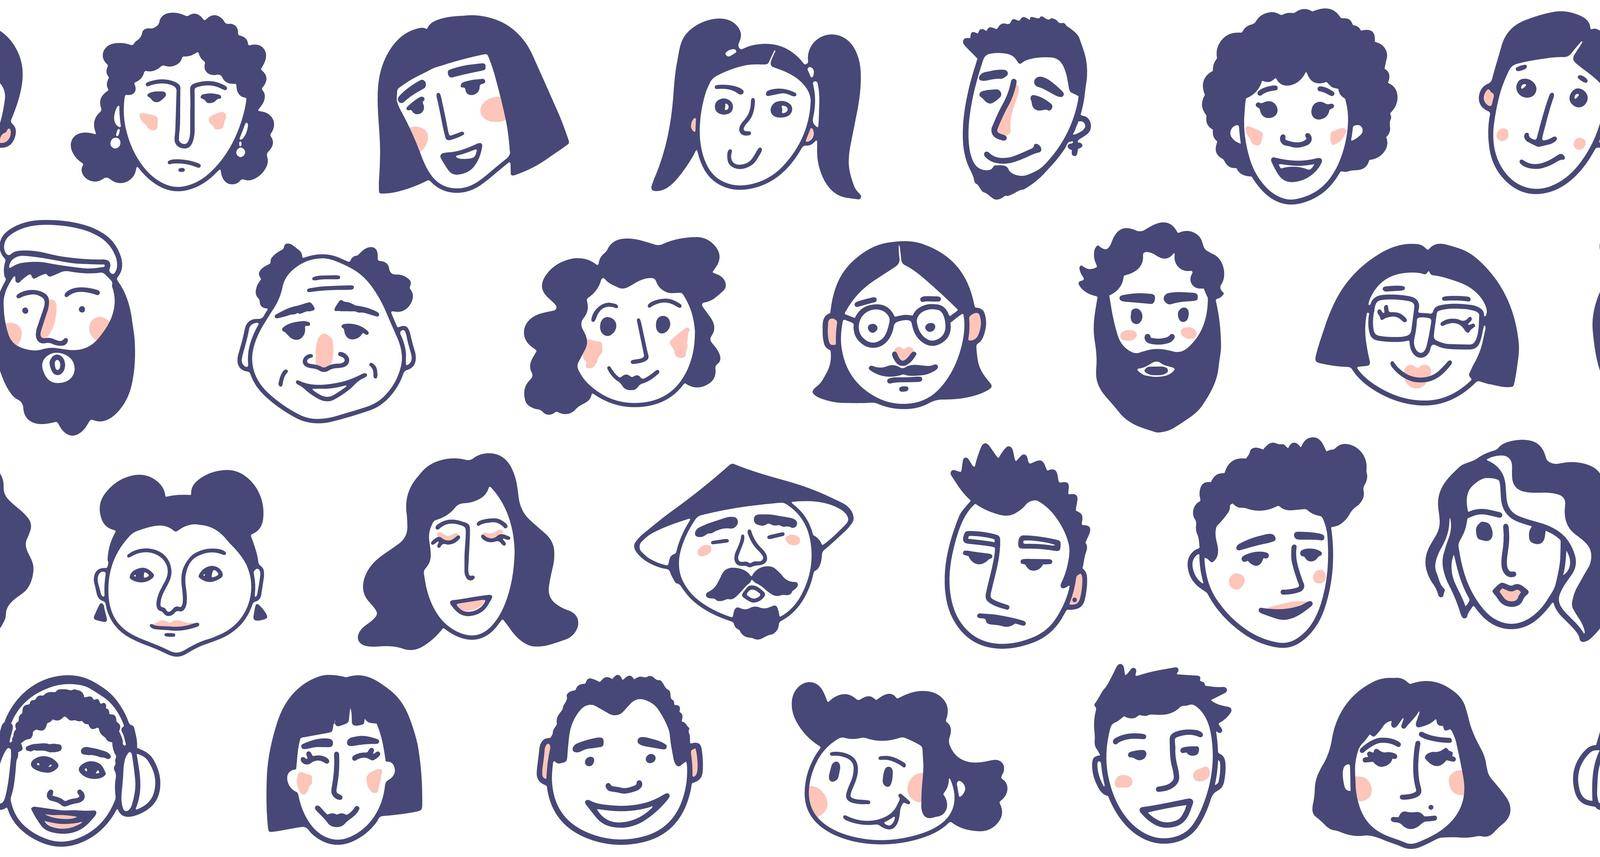 Funy faces seamless pattern. Black and white background with cute doodle people. Vector illustration